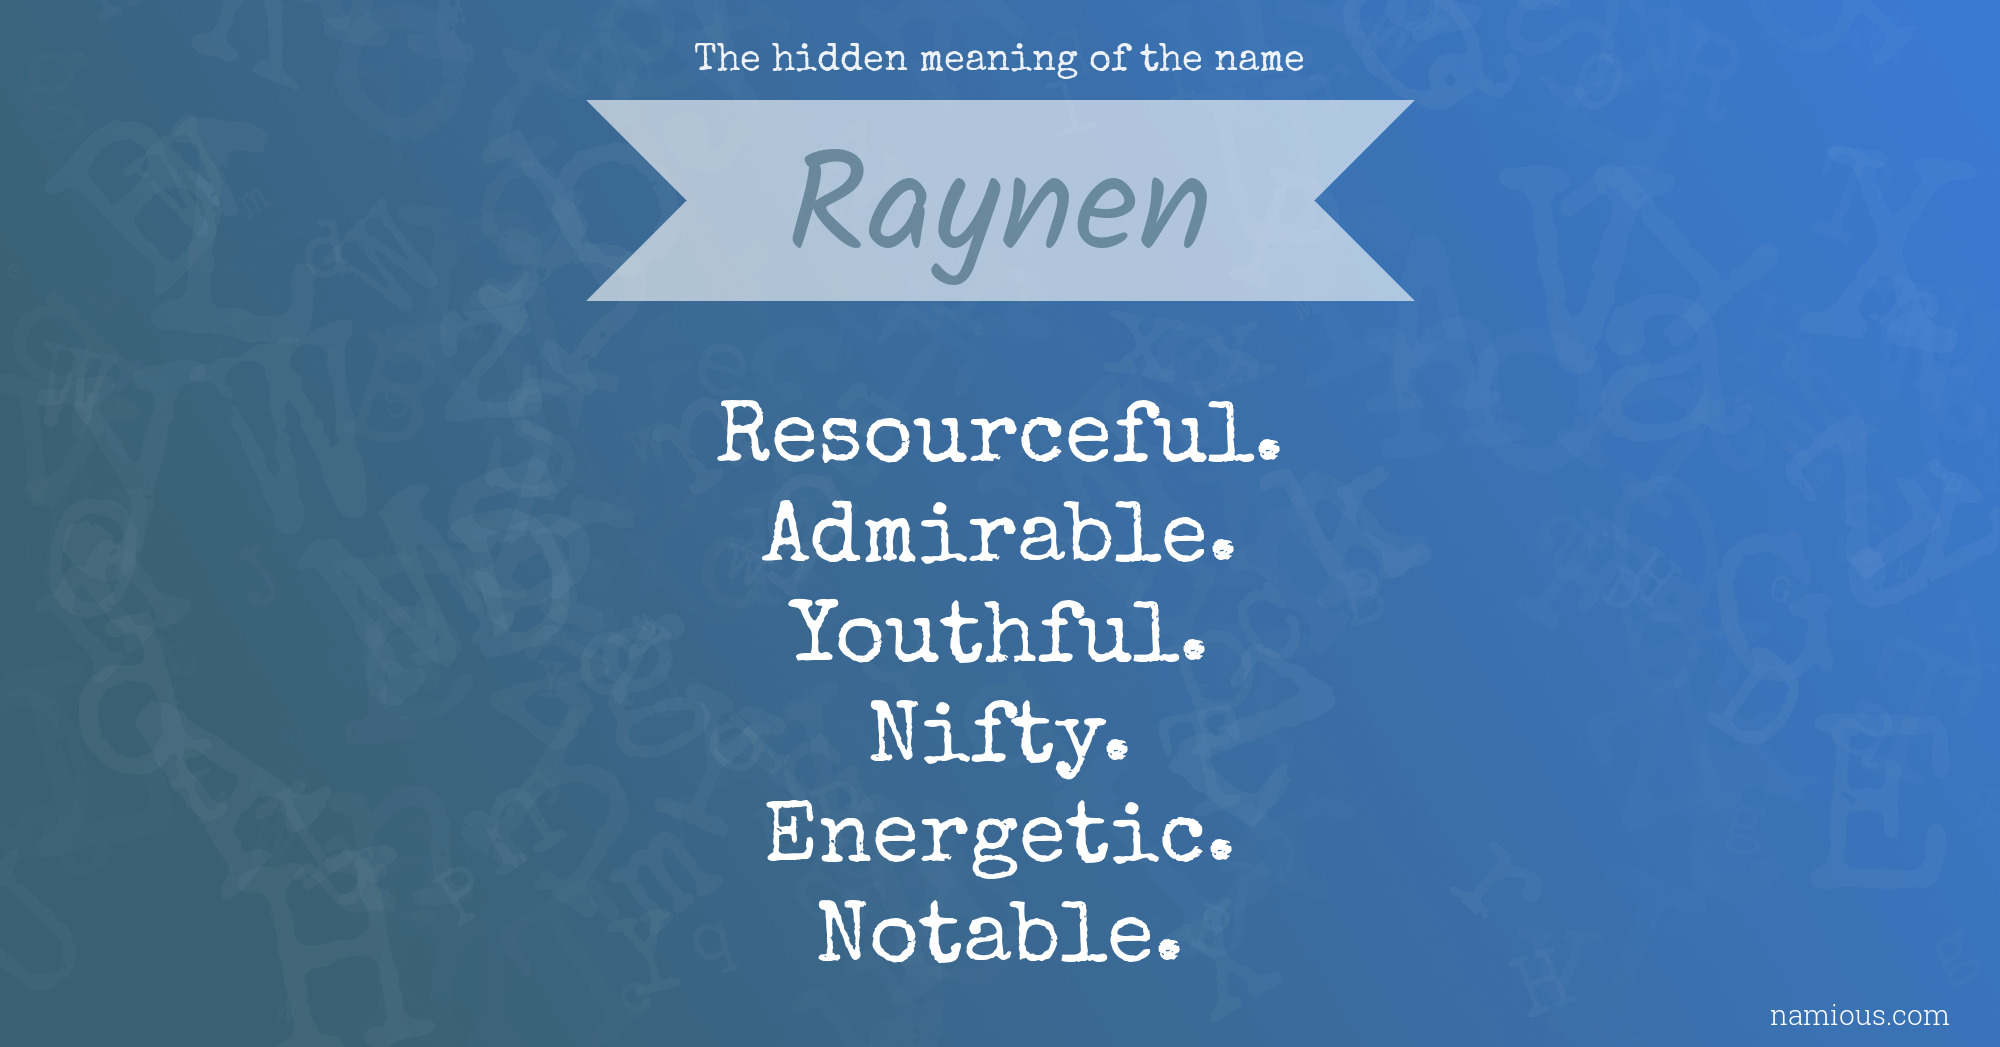 The hidden meaning of the name Raynen